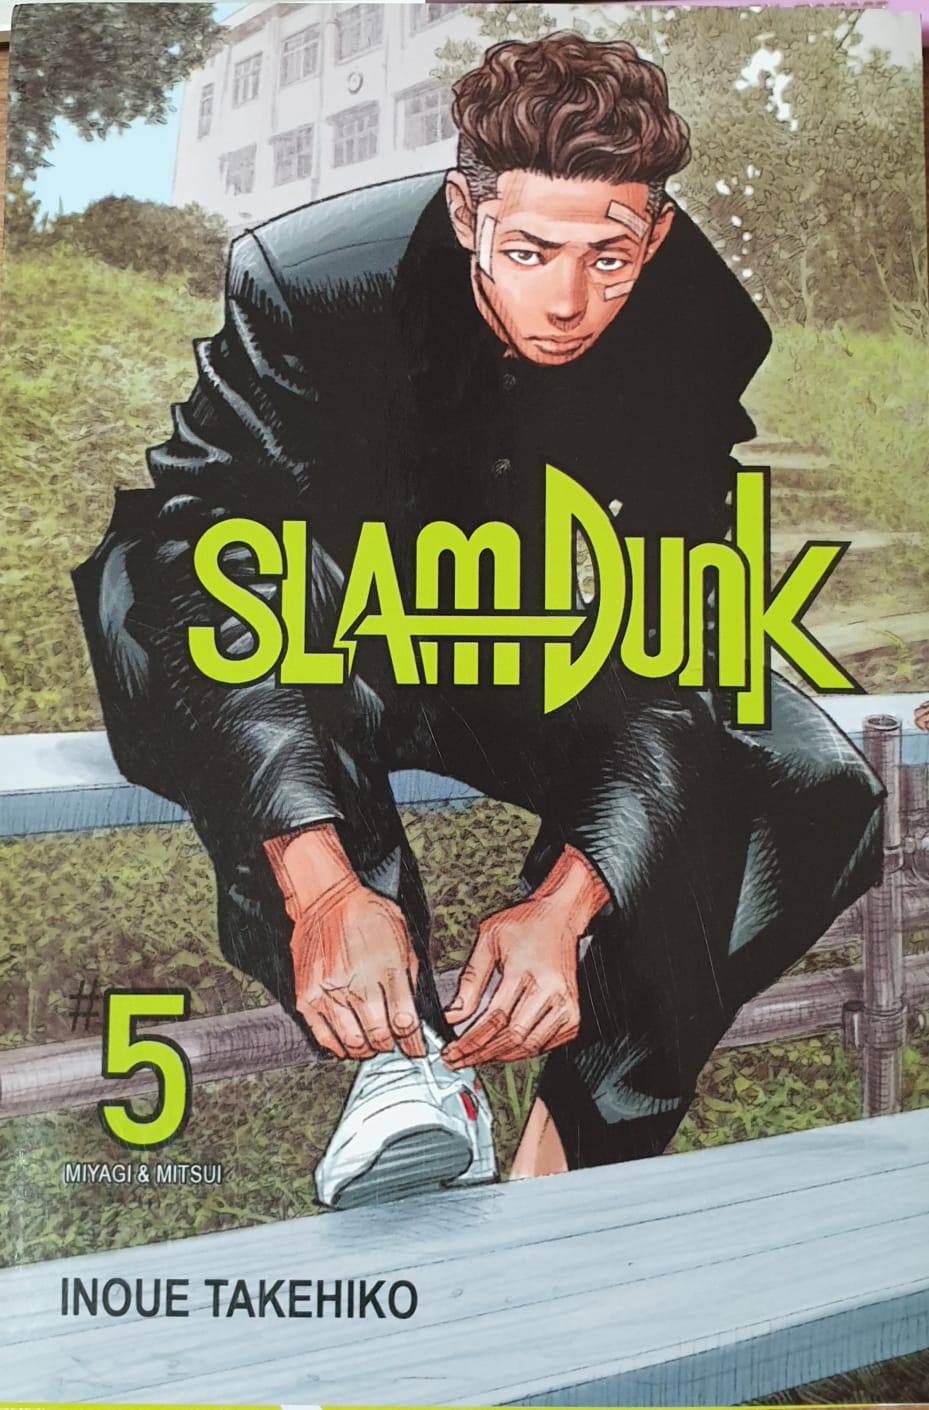 Slam dunk new cover edition 5